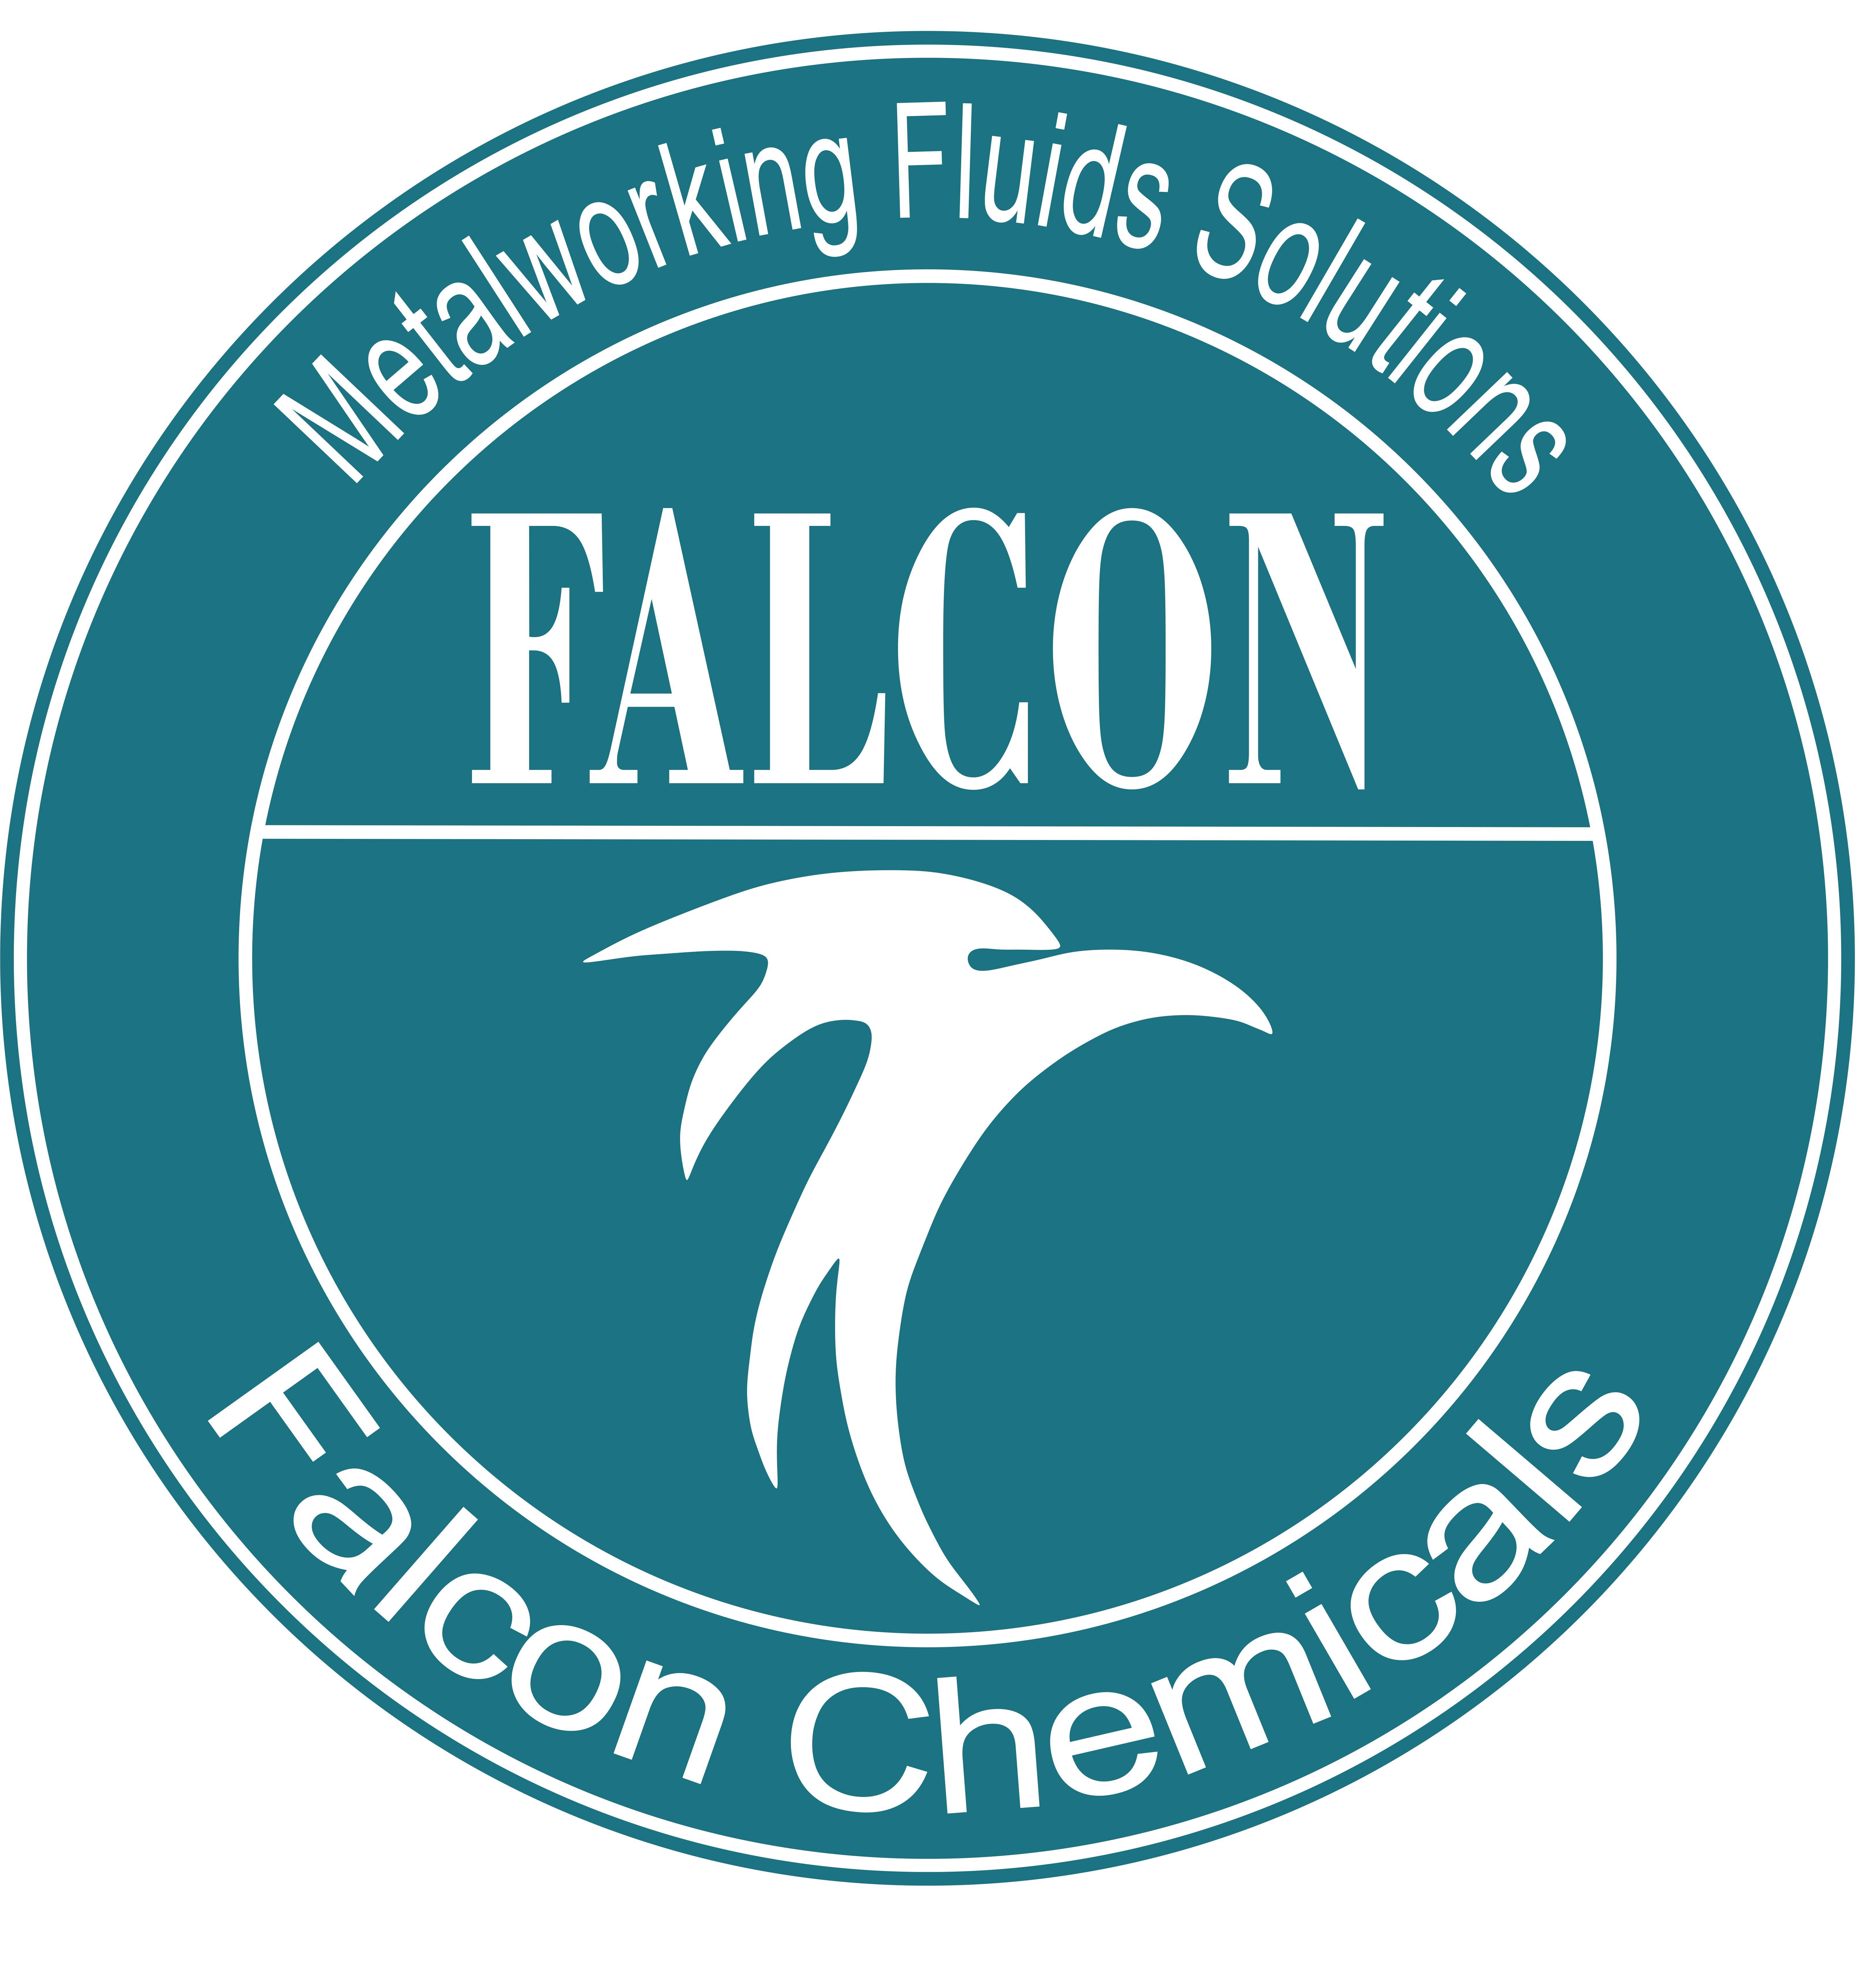 FALCON CHEMICALS